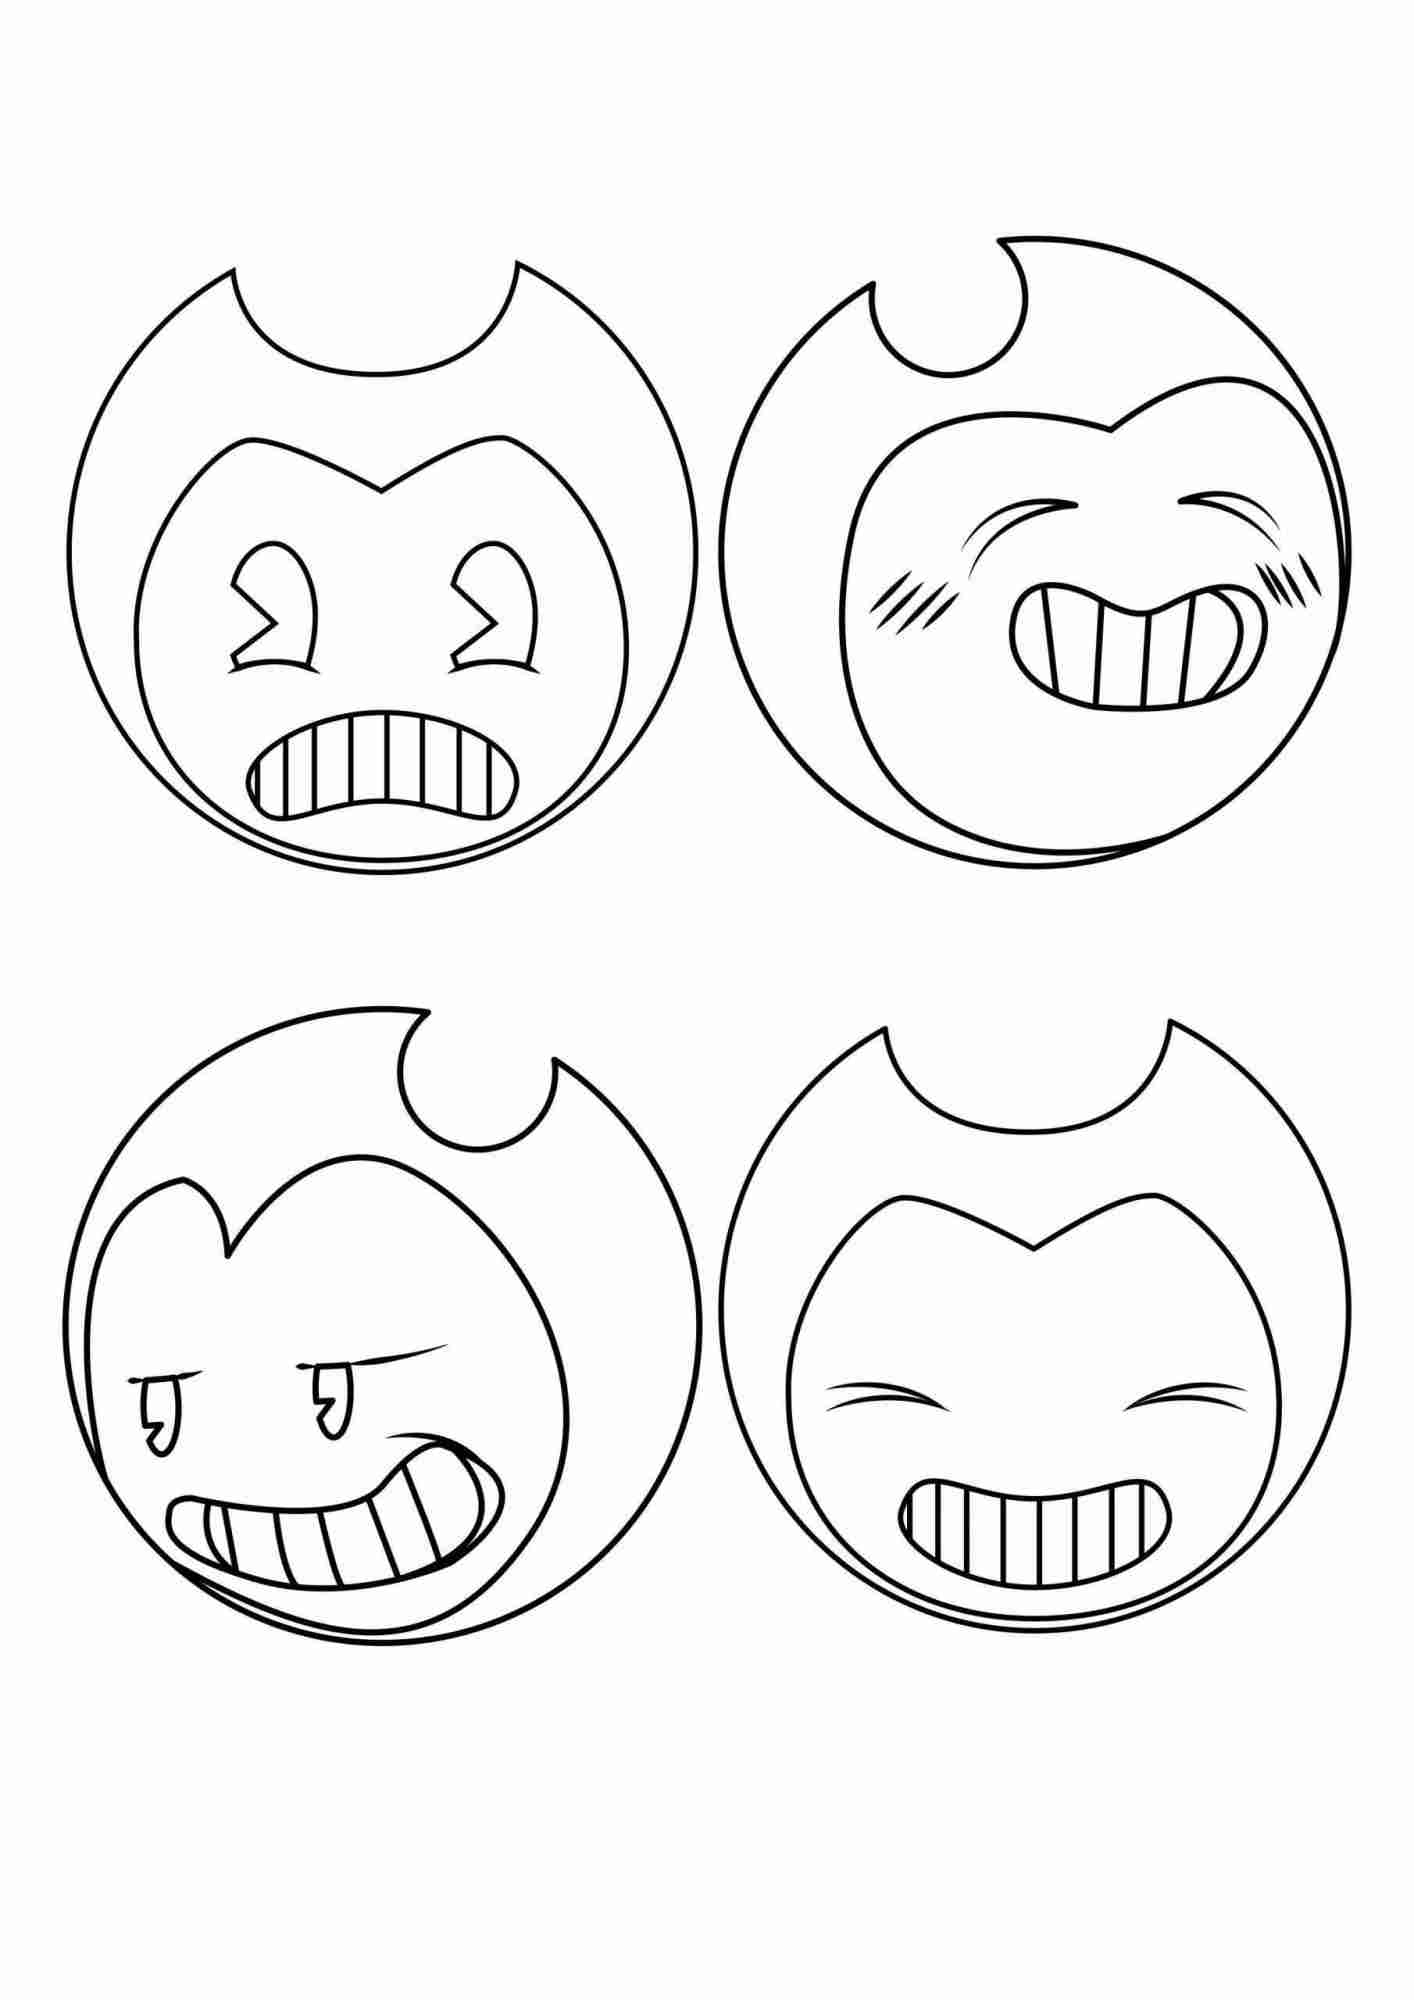 Fifty-shaded Of Bendy From Bendy And The Ink Machine Coloring Pages